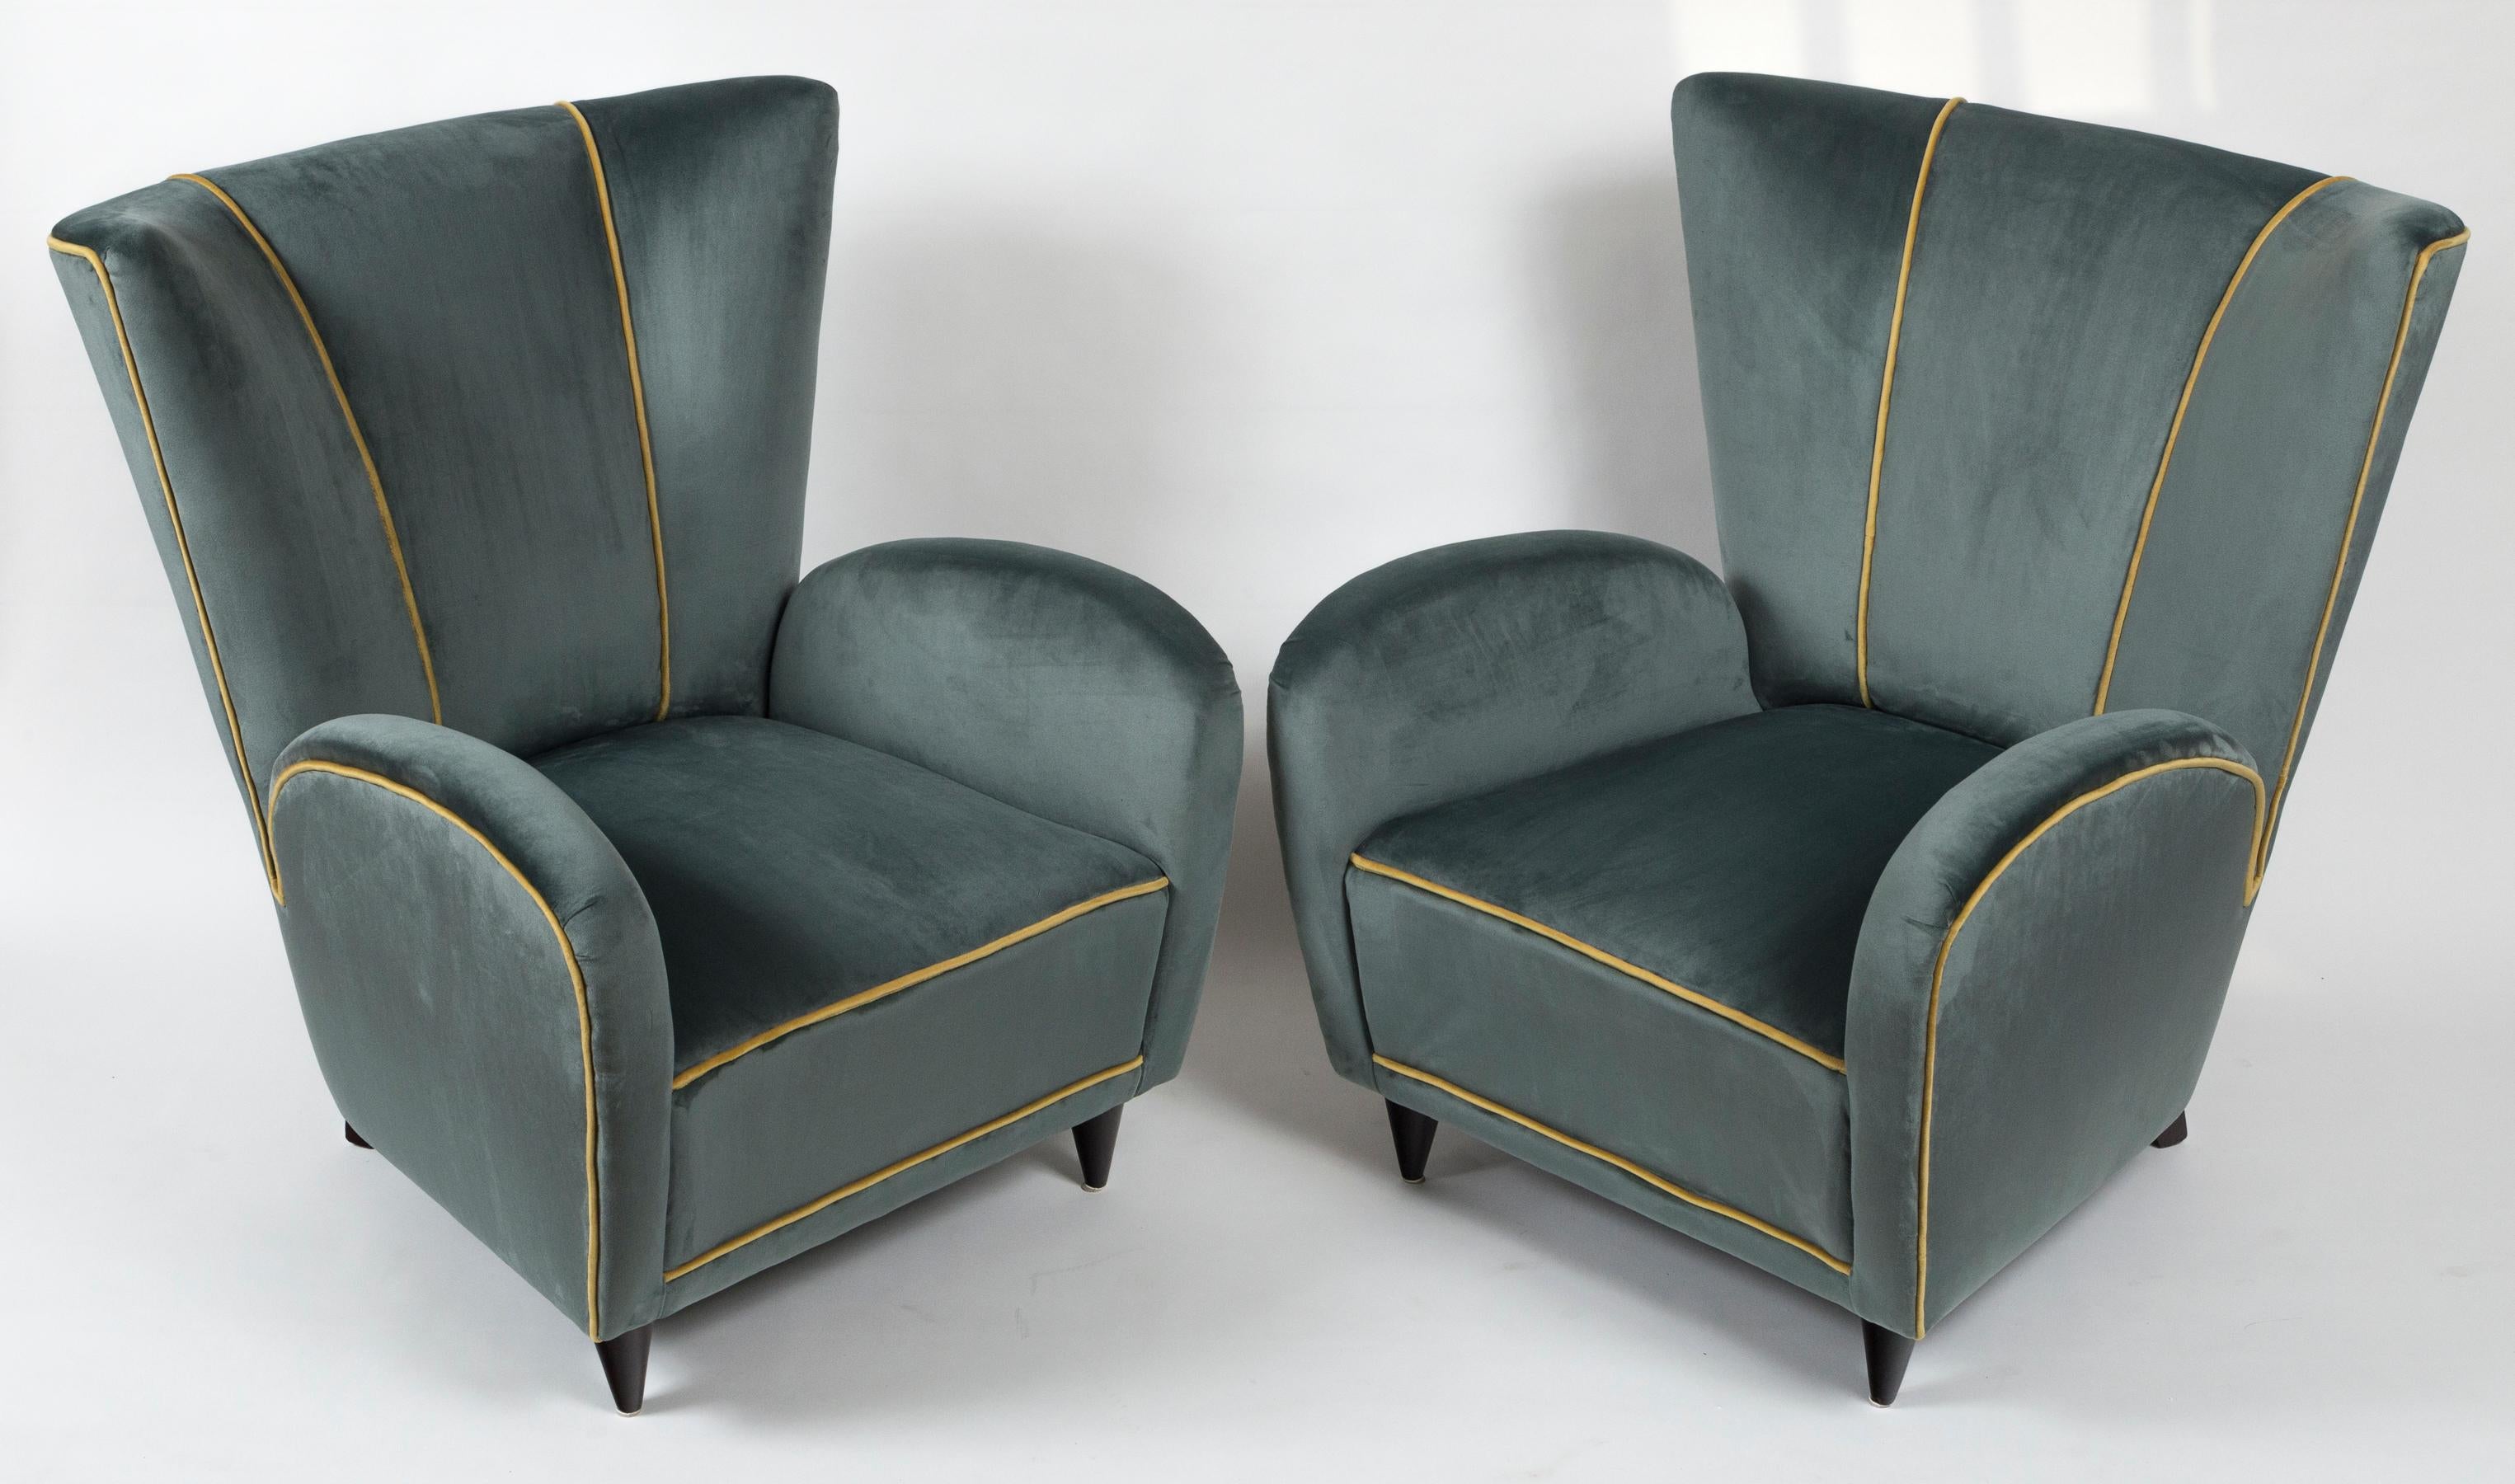 A sculptural and sleek pair of fully upholsetered armchairs finishing with lacquered wood front tapered legs.
 
Extremely comfortable
Origin: Italy

Dating: 1950-1960ca

Condition: Excellent, reupholstered and wood refinished

Dimension: